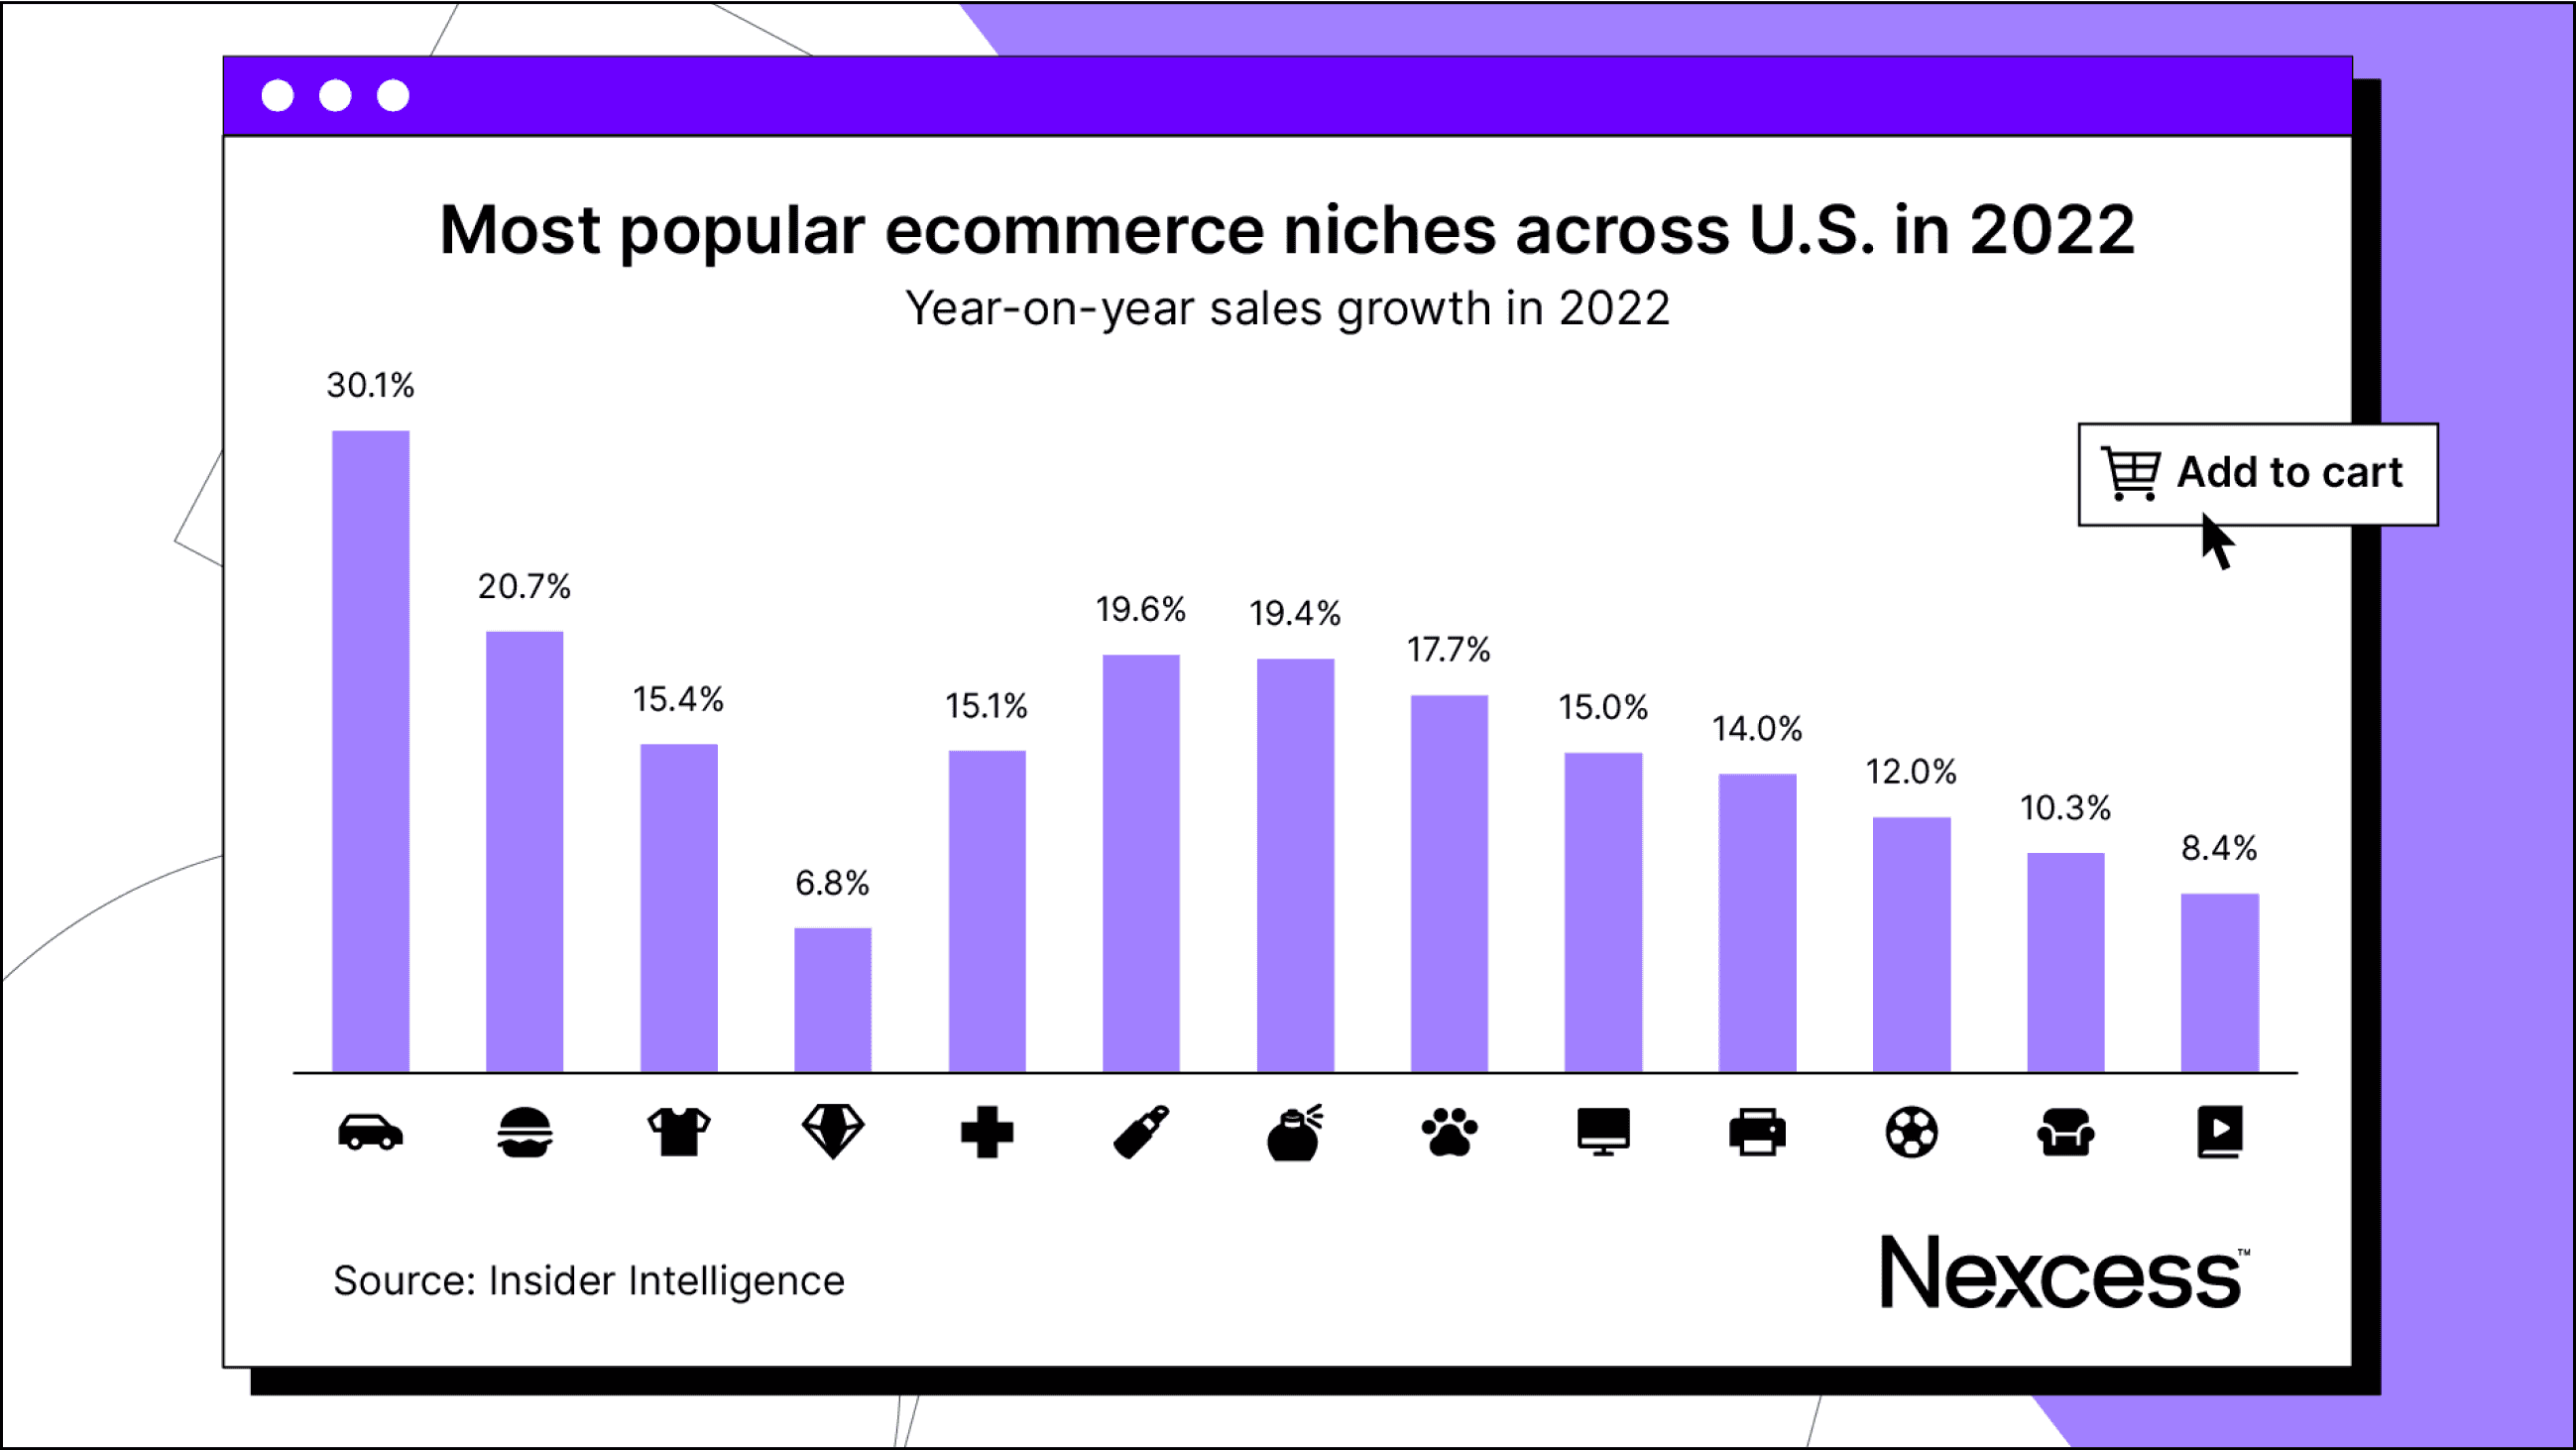 Most popular ecommerce niches across the U.S.